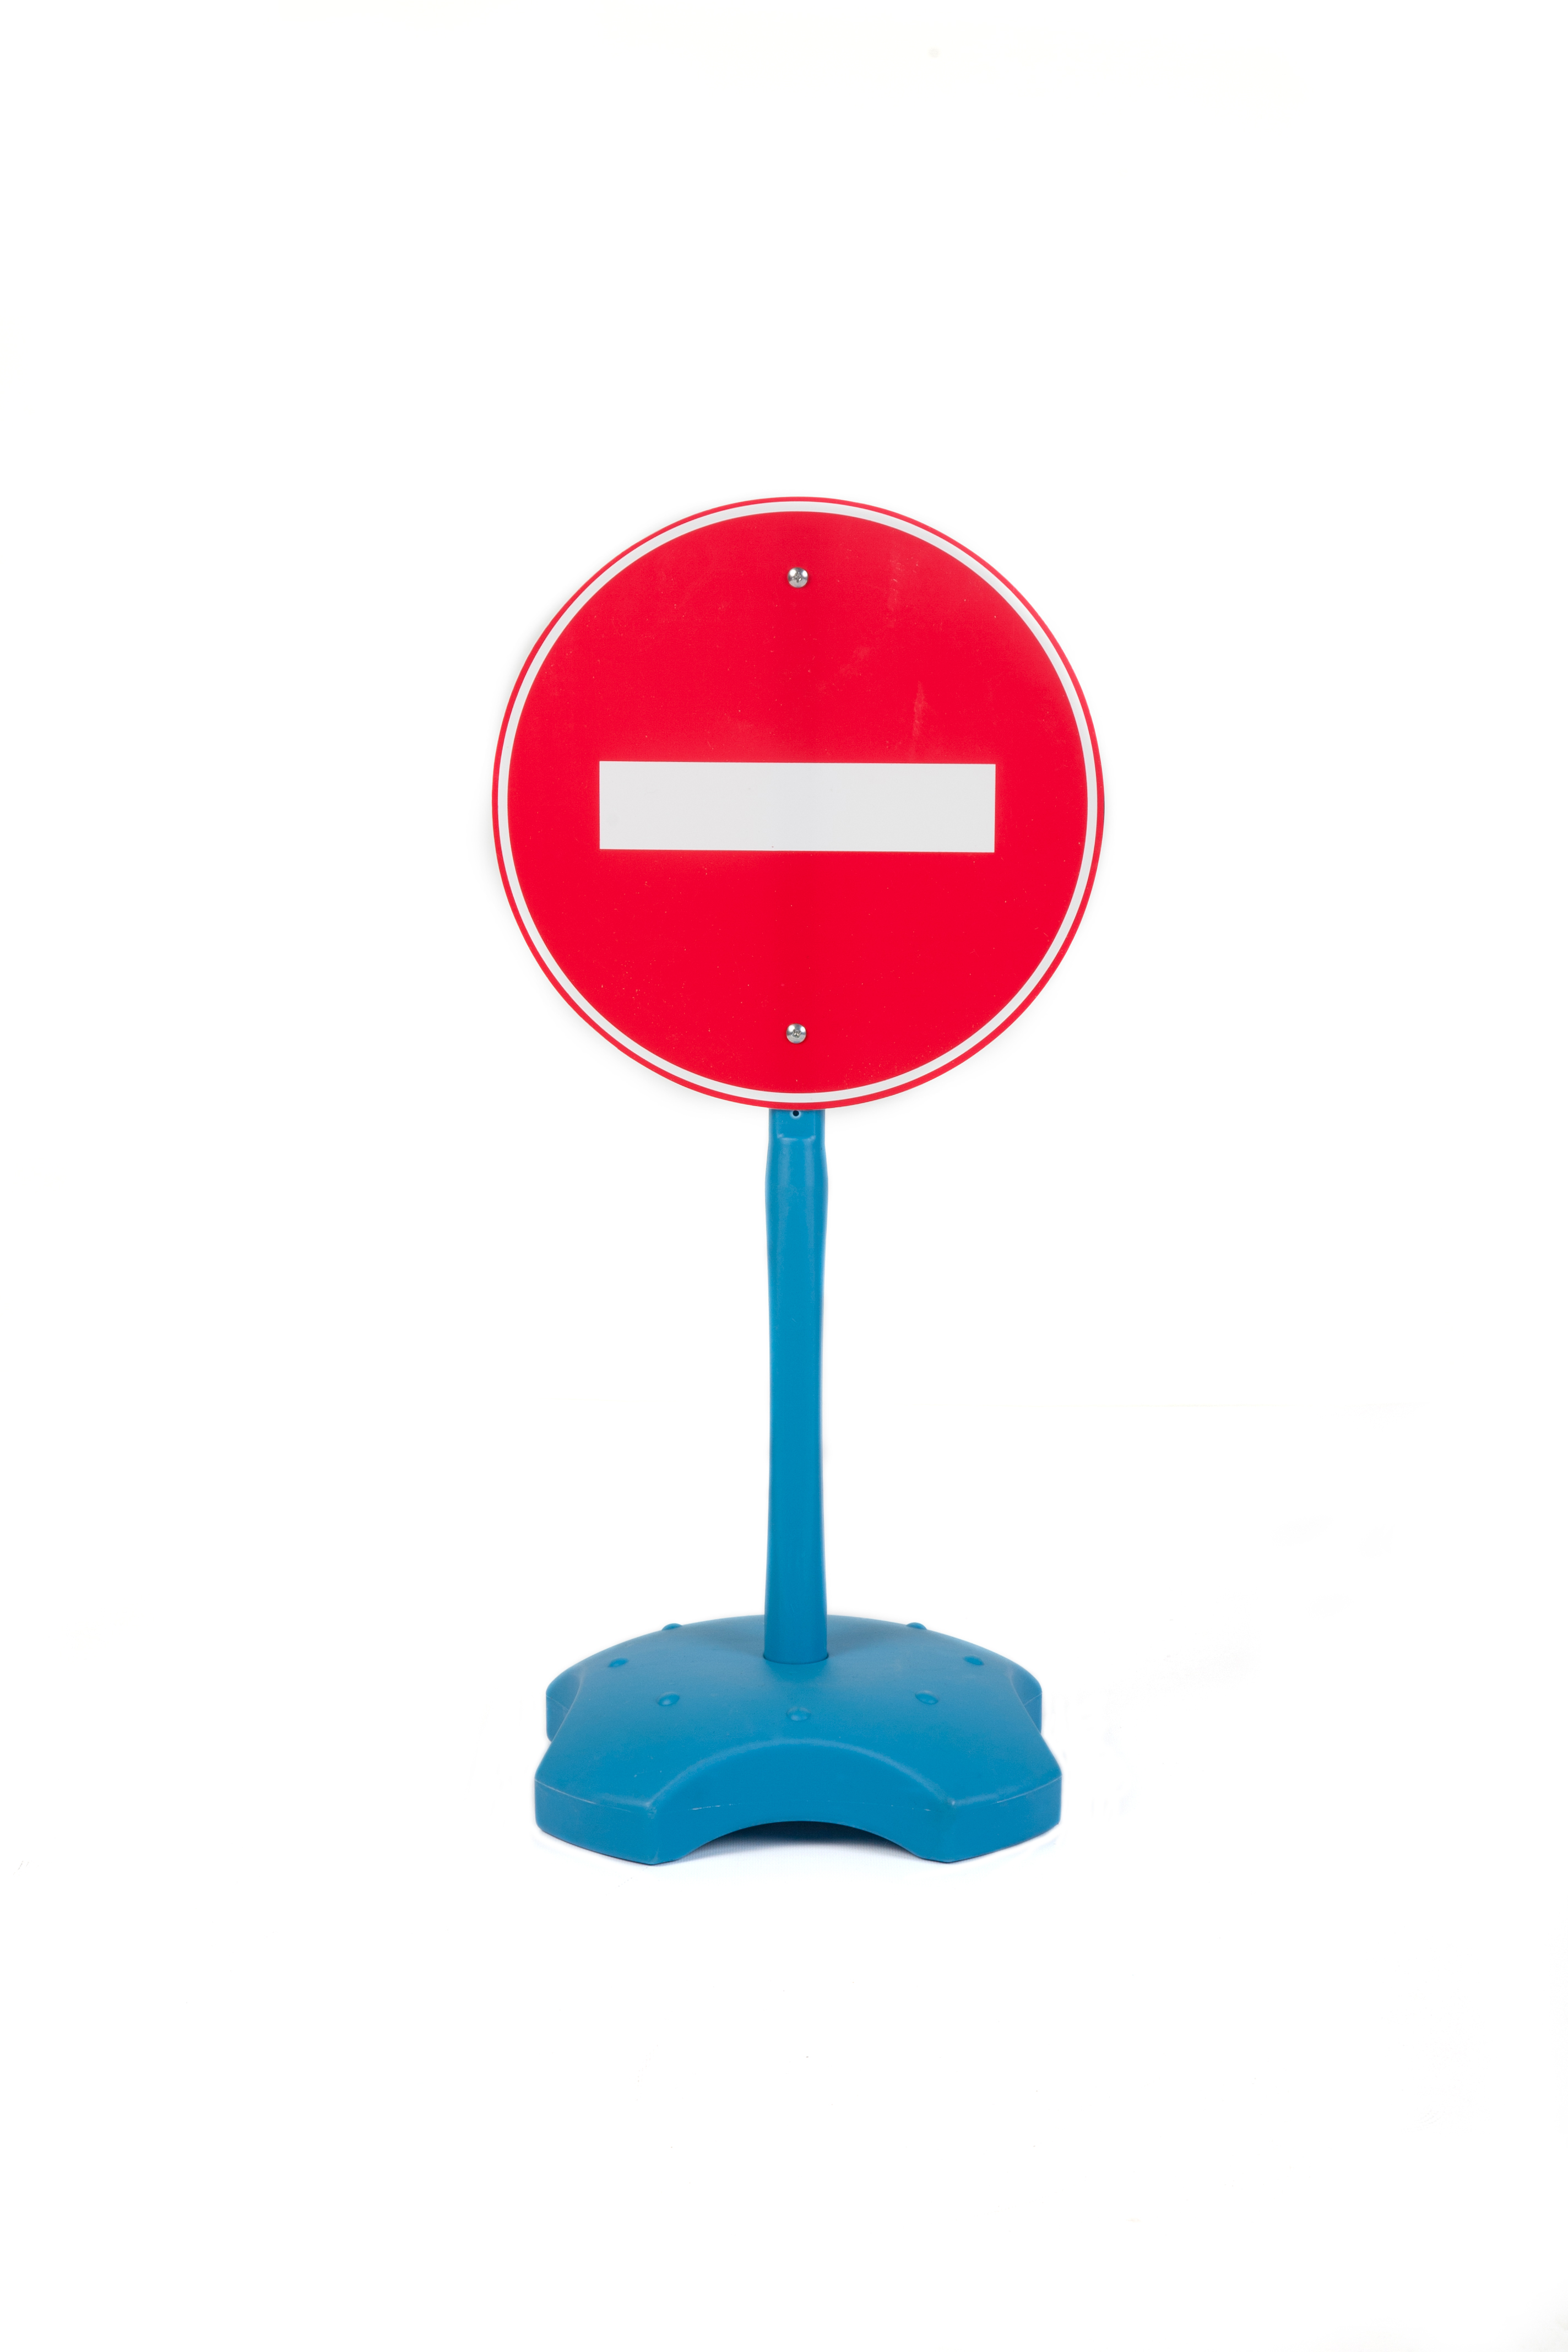 Child's No Entry Educational Traffic Road Sign - Â£13.95 : Kids ...